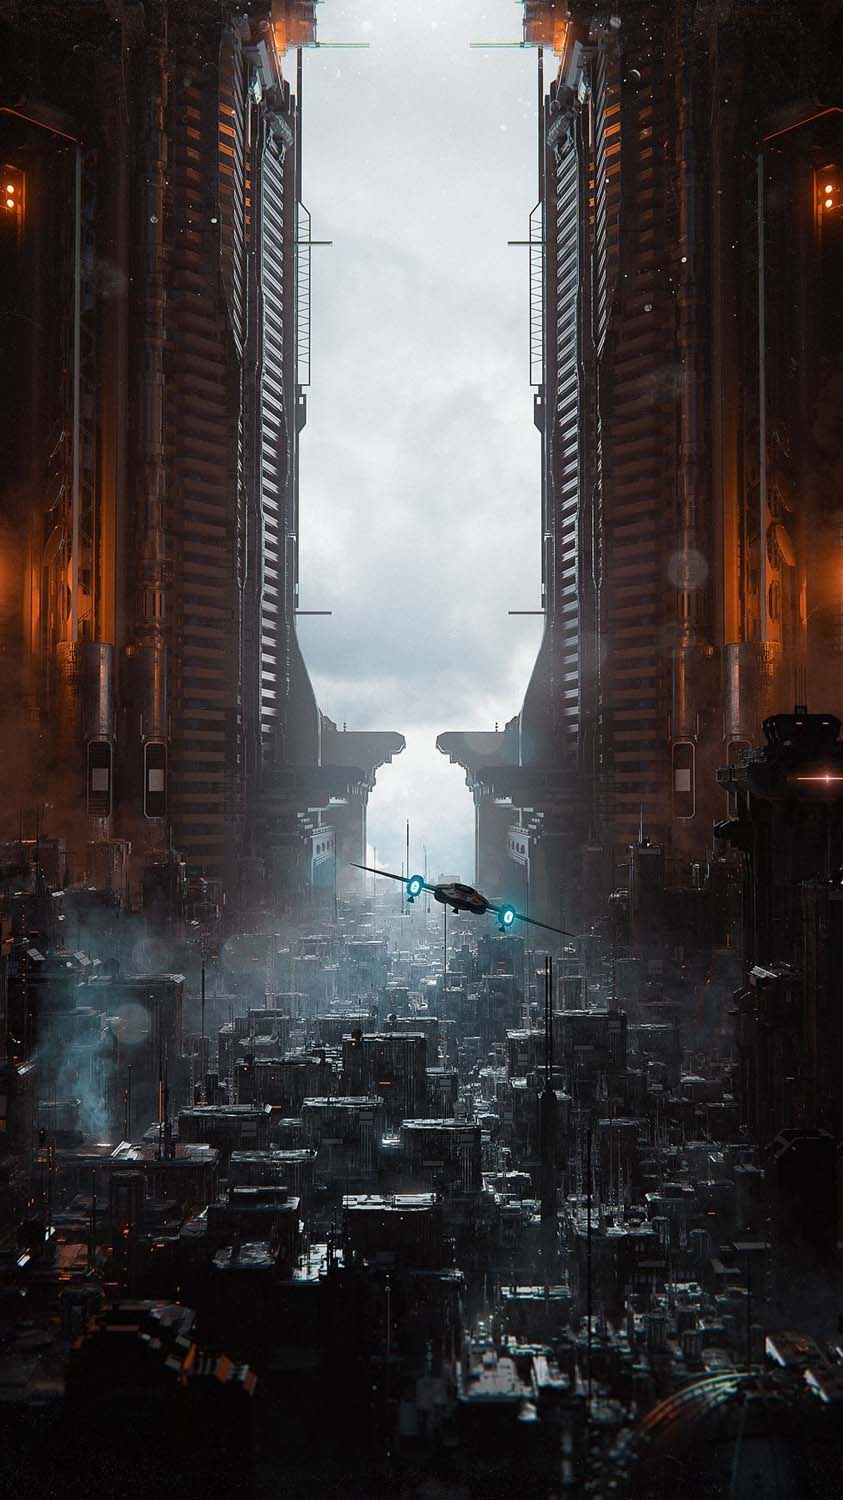 Future City IPhone Wallpaper HD - IPhone Wallpapers : iPhone Wallpapers